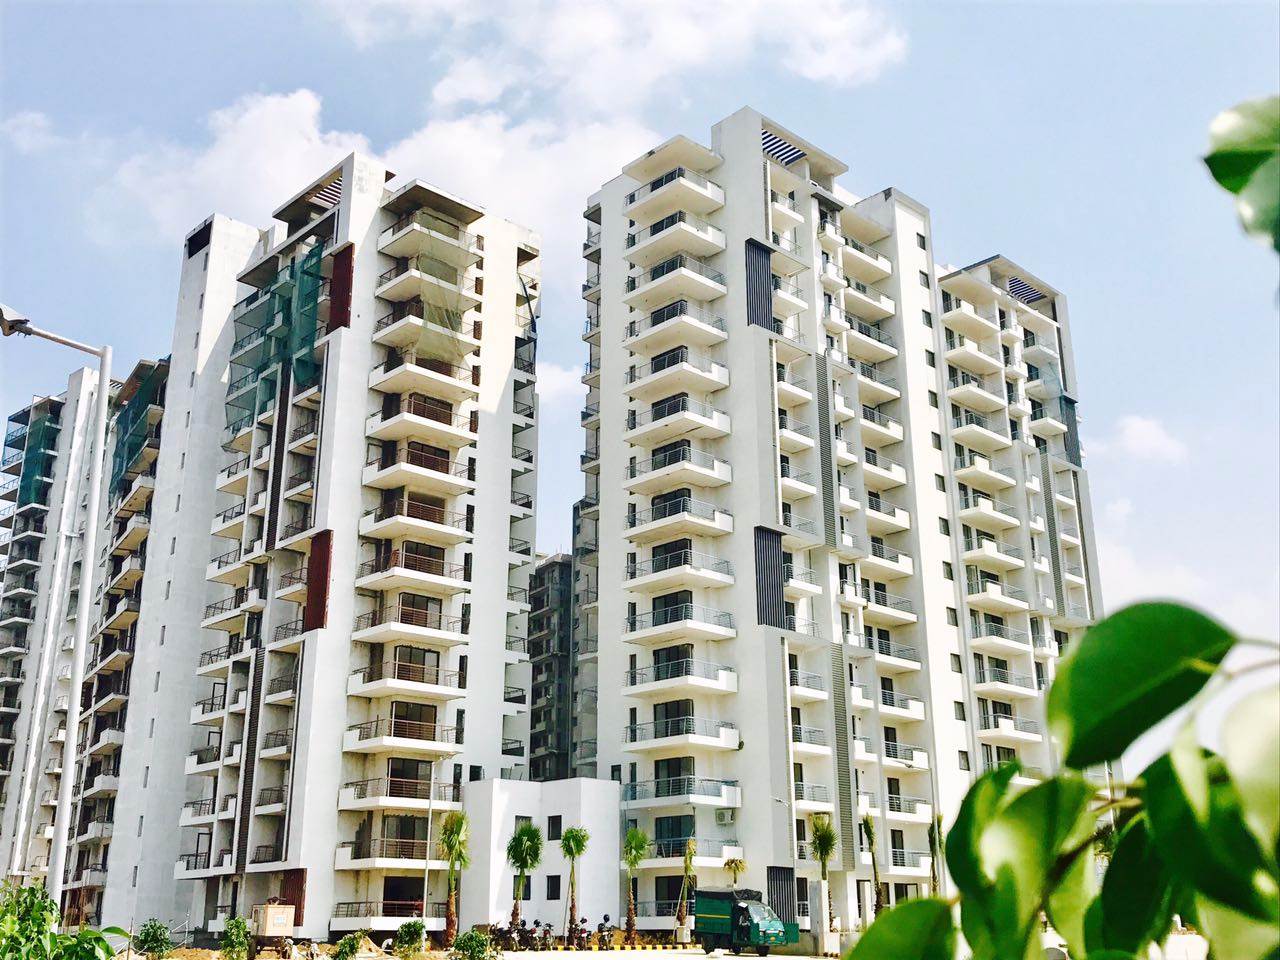 Site is now open for exclusive preview at Godrej Oasis in Gurgaon